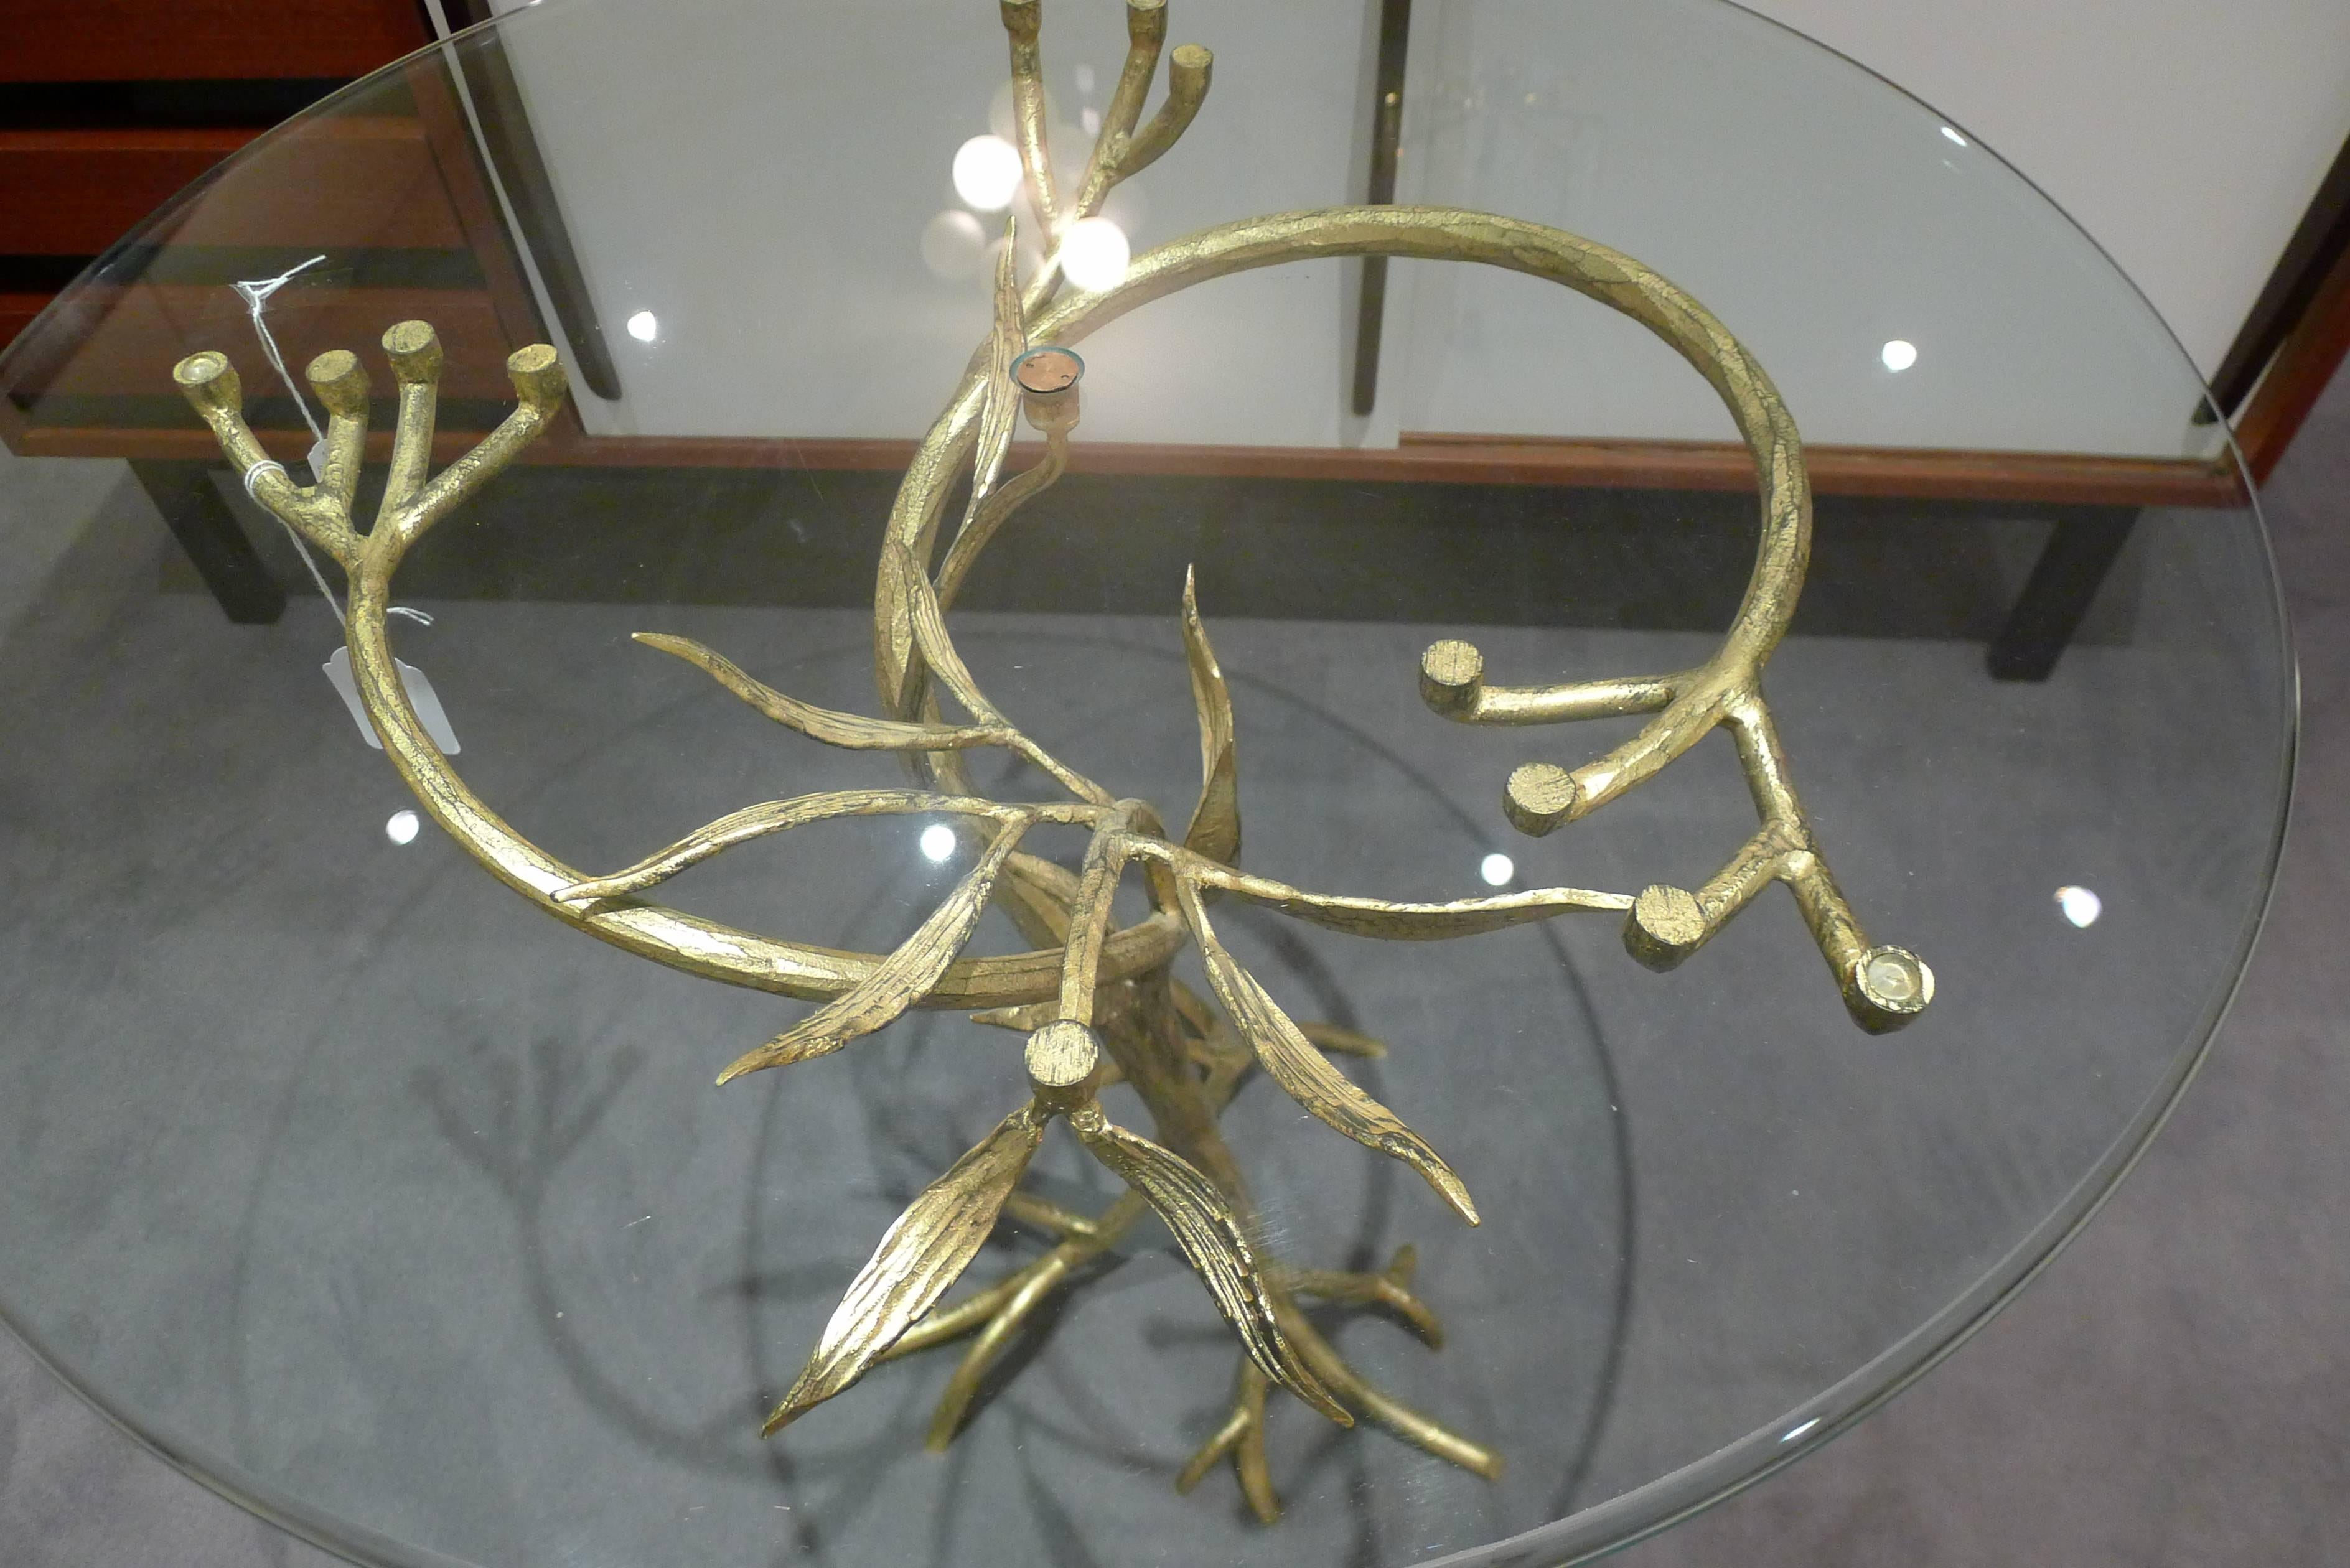 This is a coffee table like a tree. The structure is wrought iron with a gold pattern.